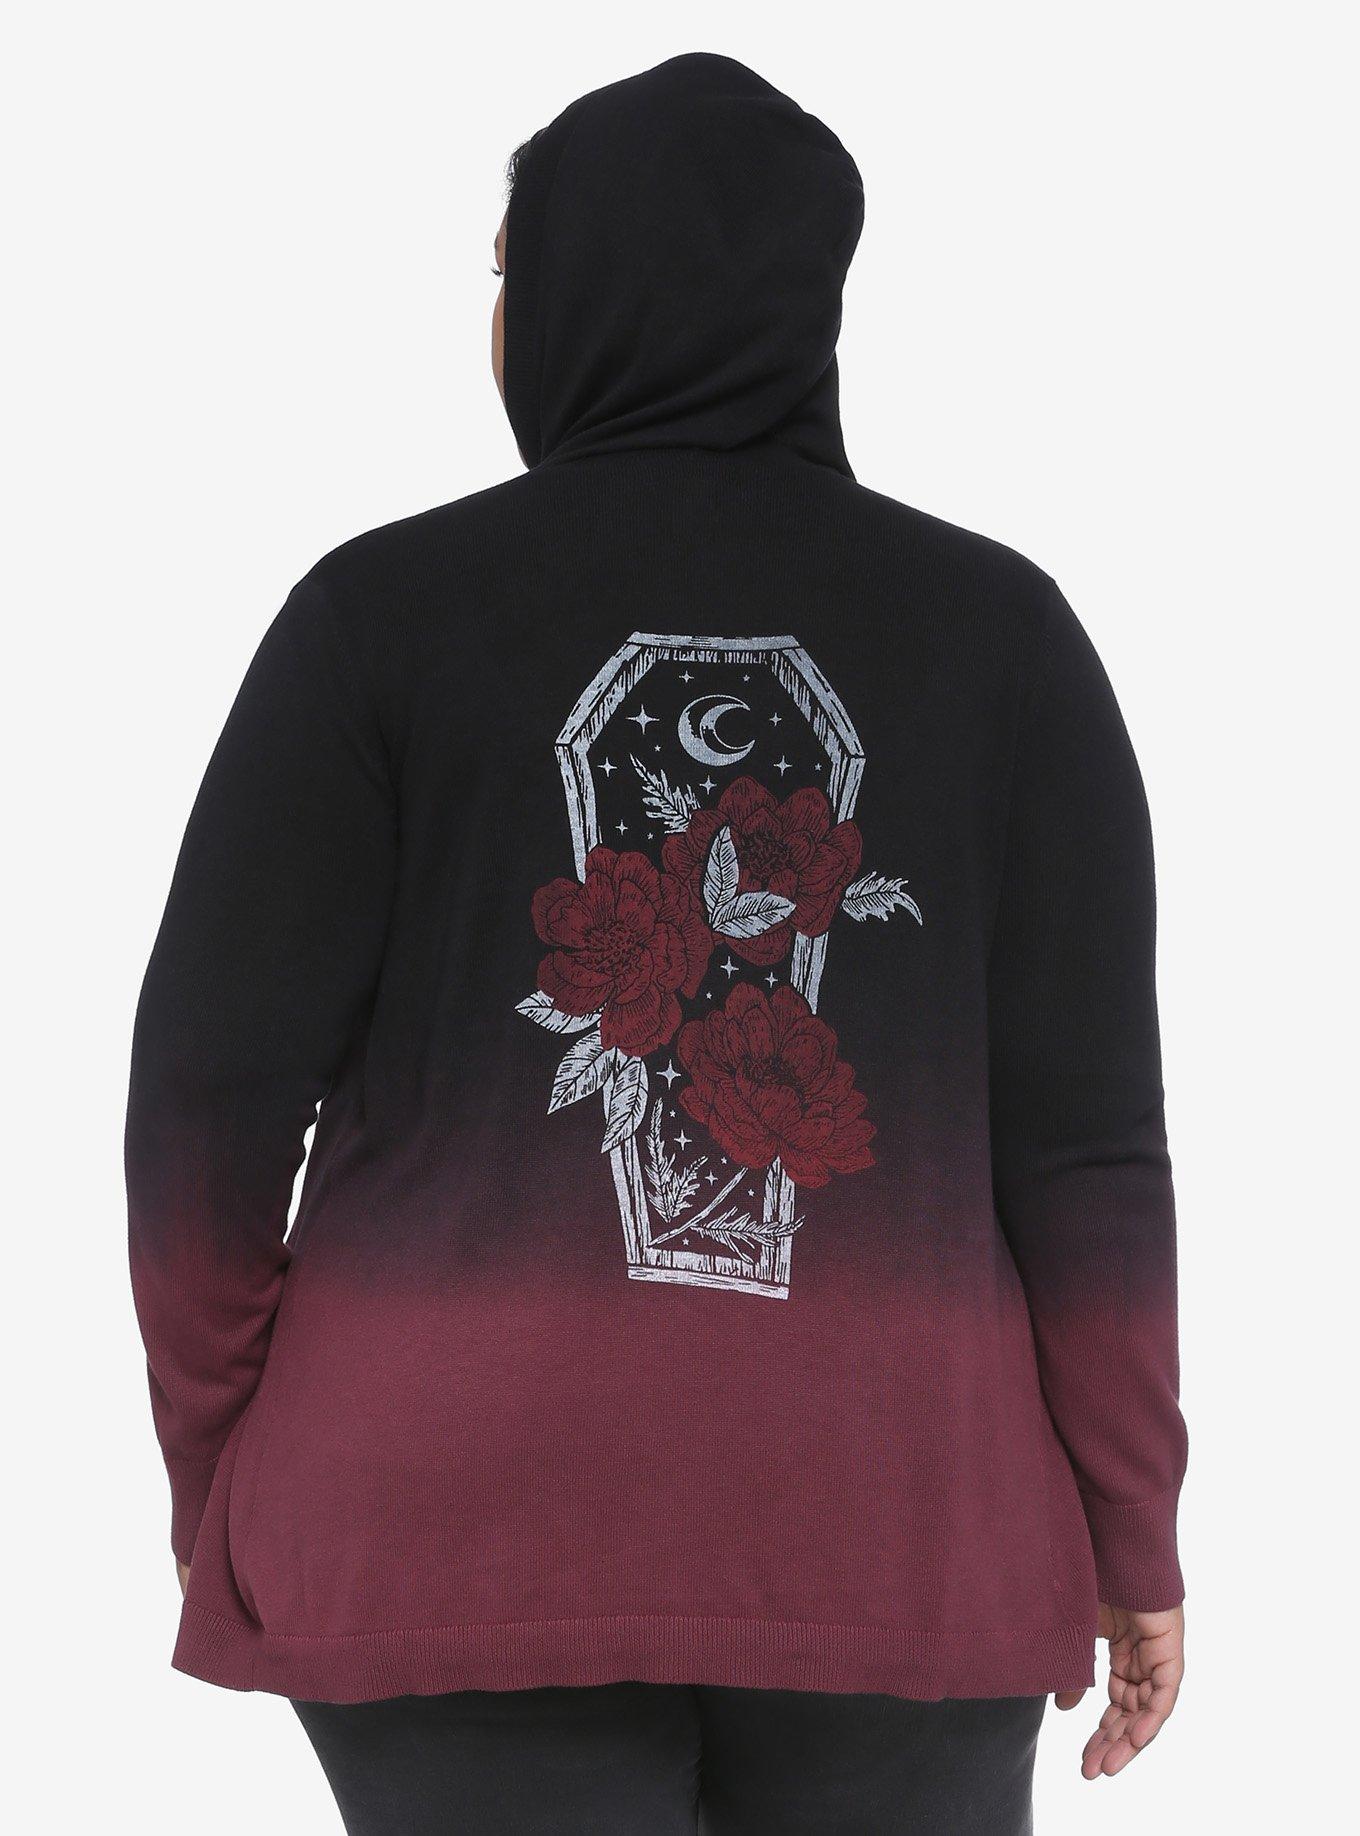 Black & Red Coffin & Roses Girls Hooded Open Cardigan Plus Size, BLACK, hi-res